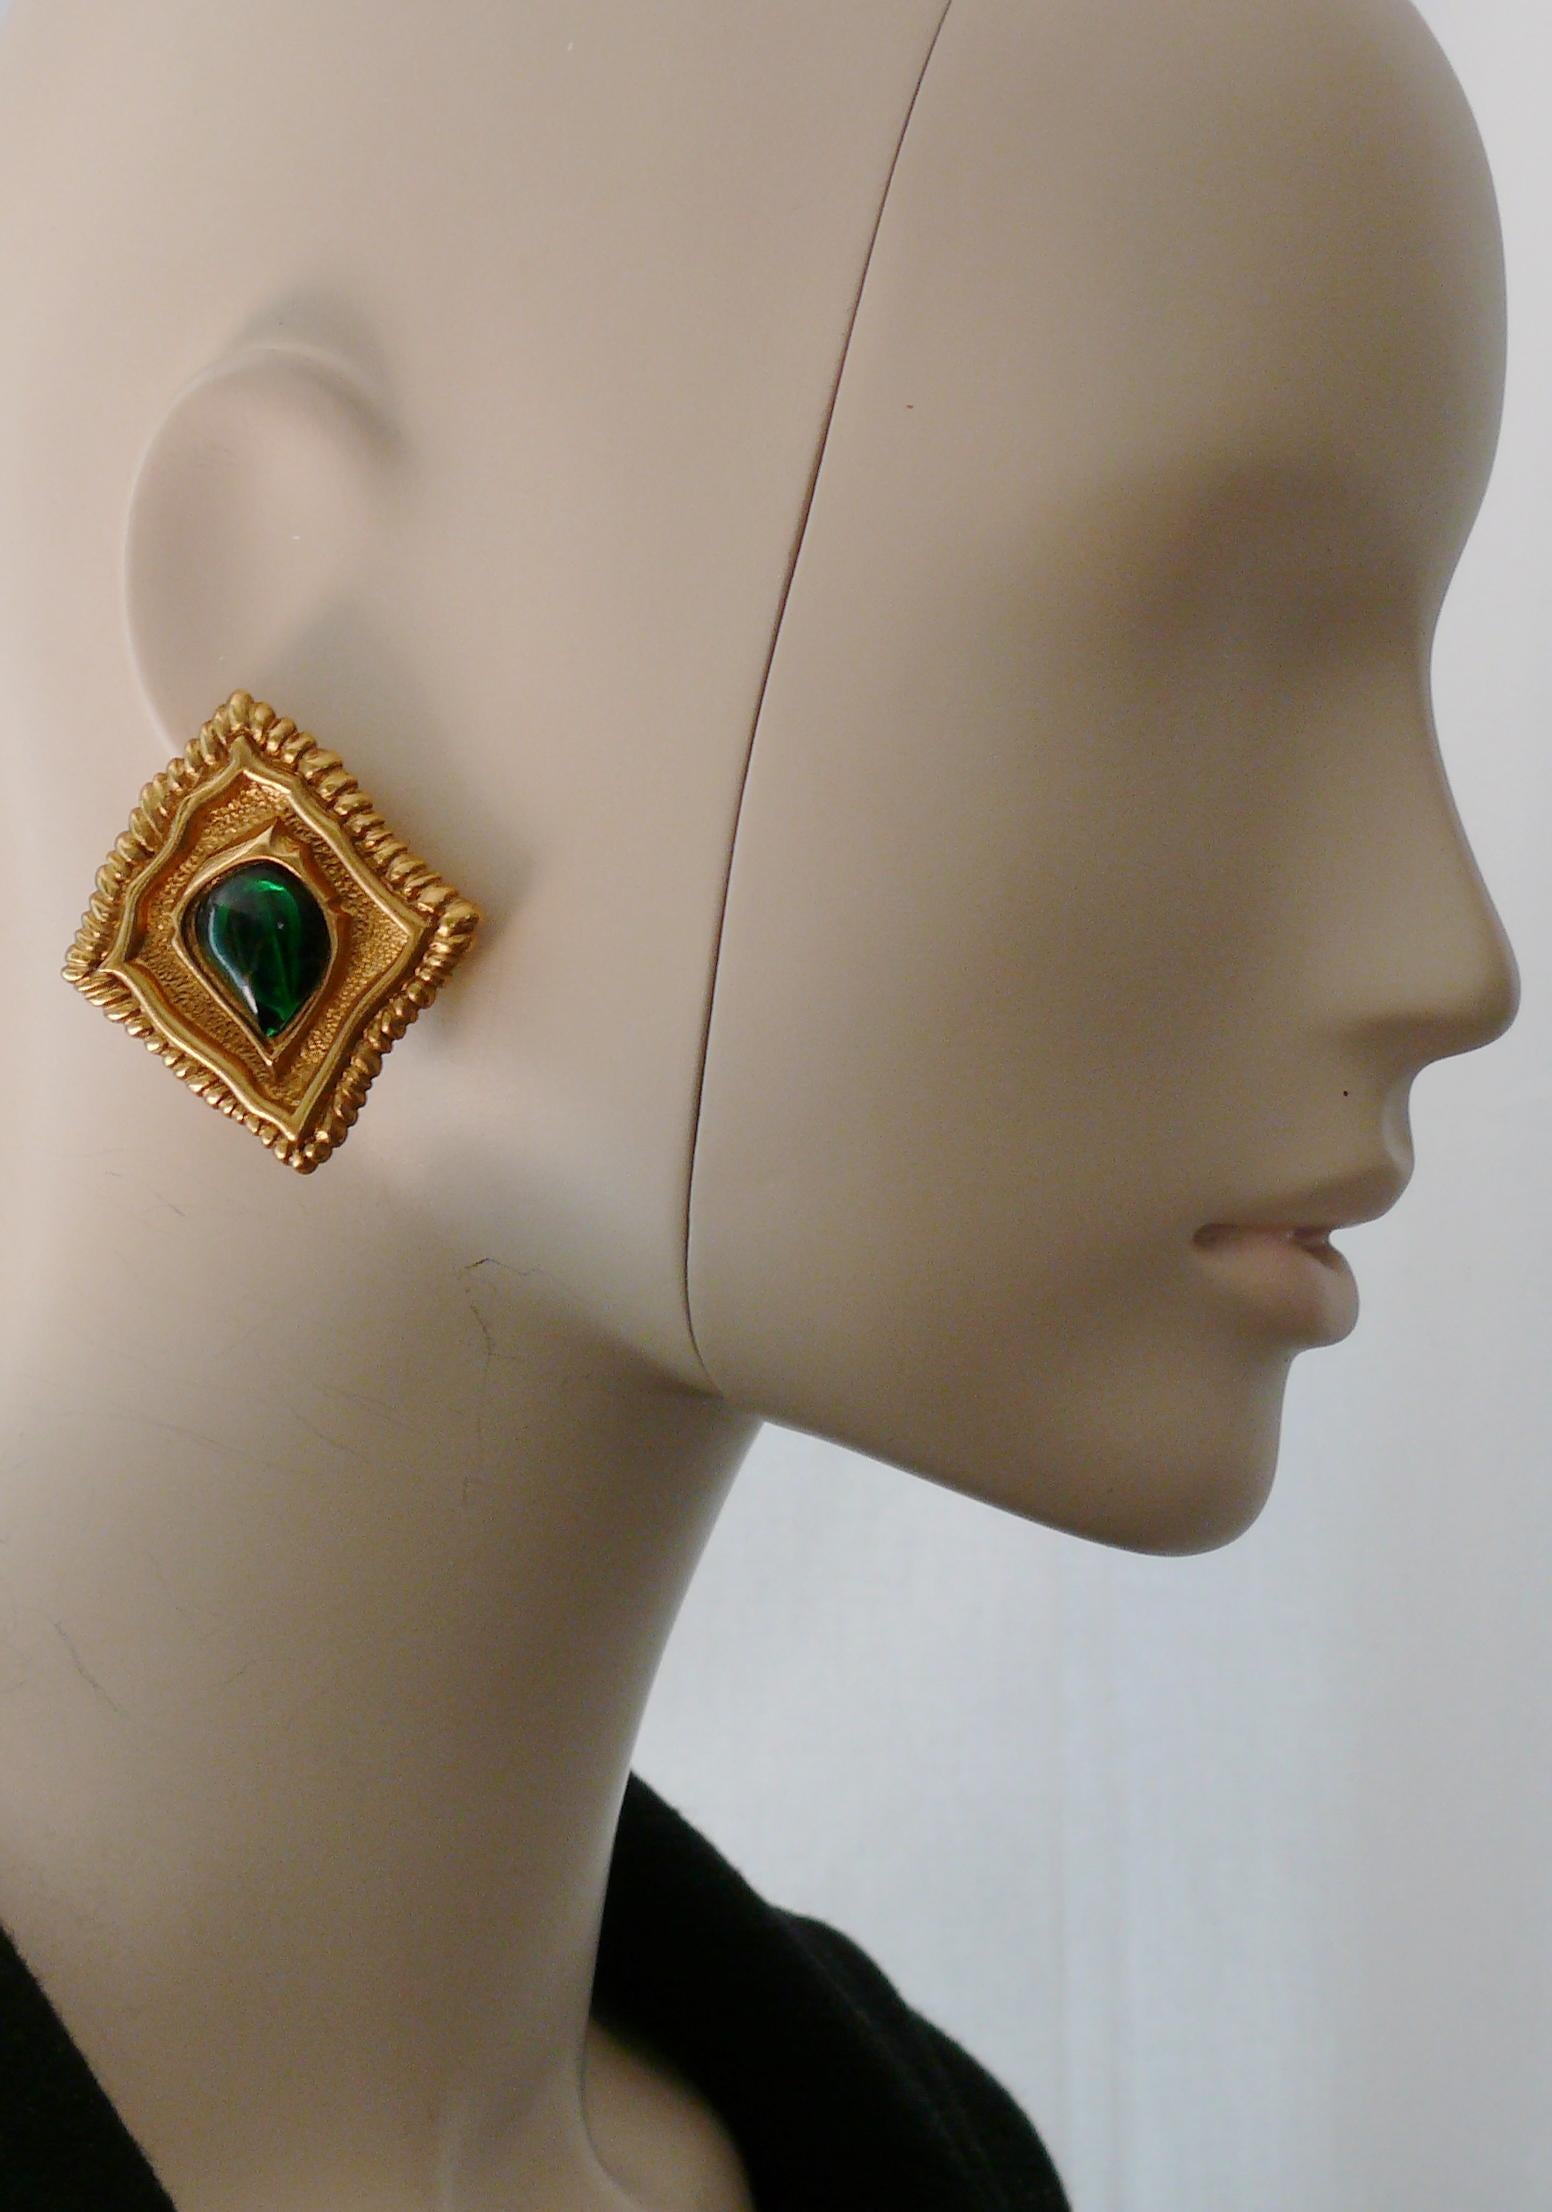 JEAN LOUIS SCHERRER vintage antiqued gold toned Oriental inspired diamond-shaped clip-on earrings embellished with a green resin cabochon.

Marked JEAN LOUIS SCHERRER Paris Made in France.

Indicative measurements : max. height approx. 5.3 cm (2.09